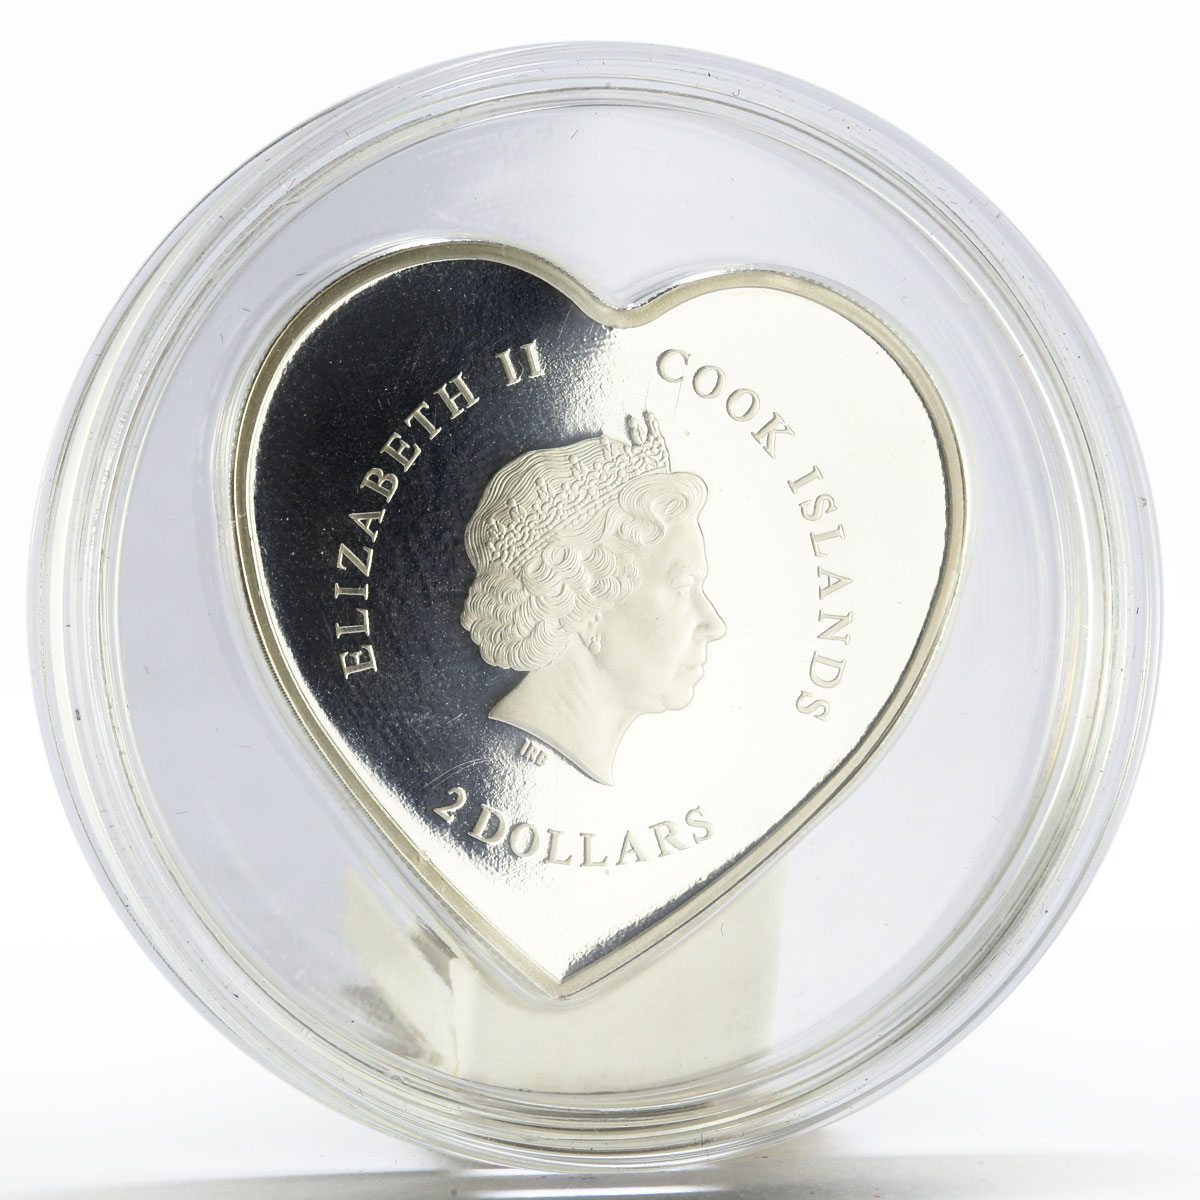 Cook Islands 2 dollars Happy Birthday series Girl and Heart silver coin 2013